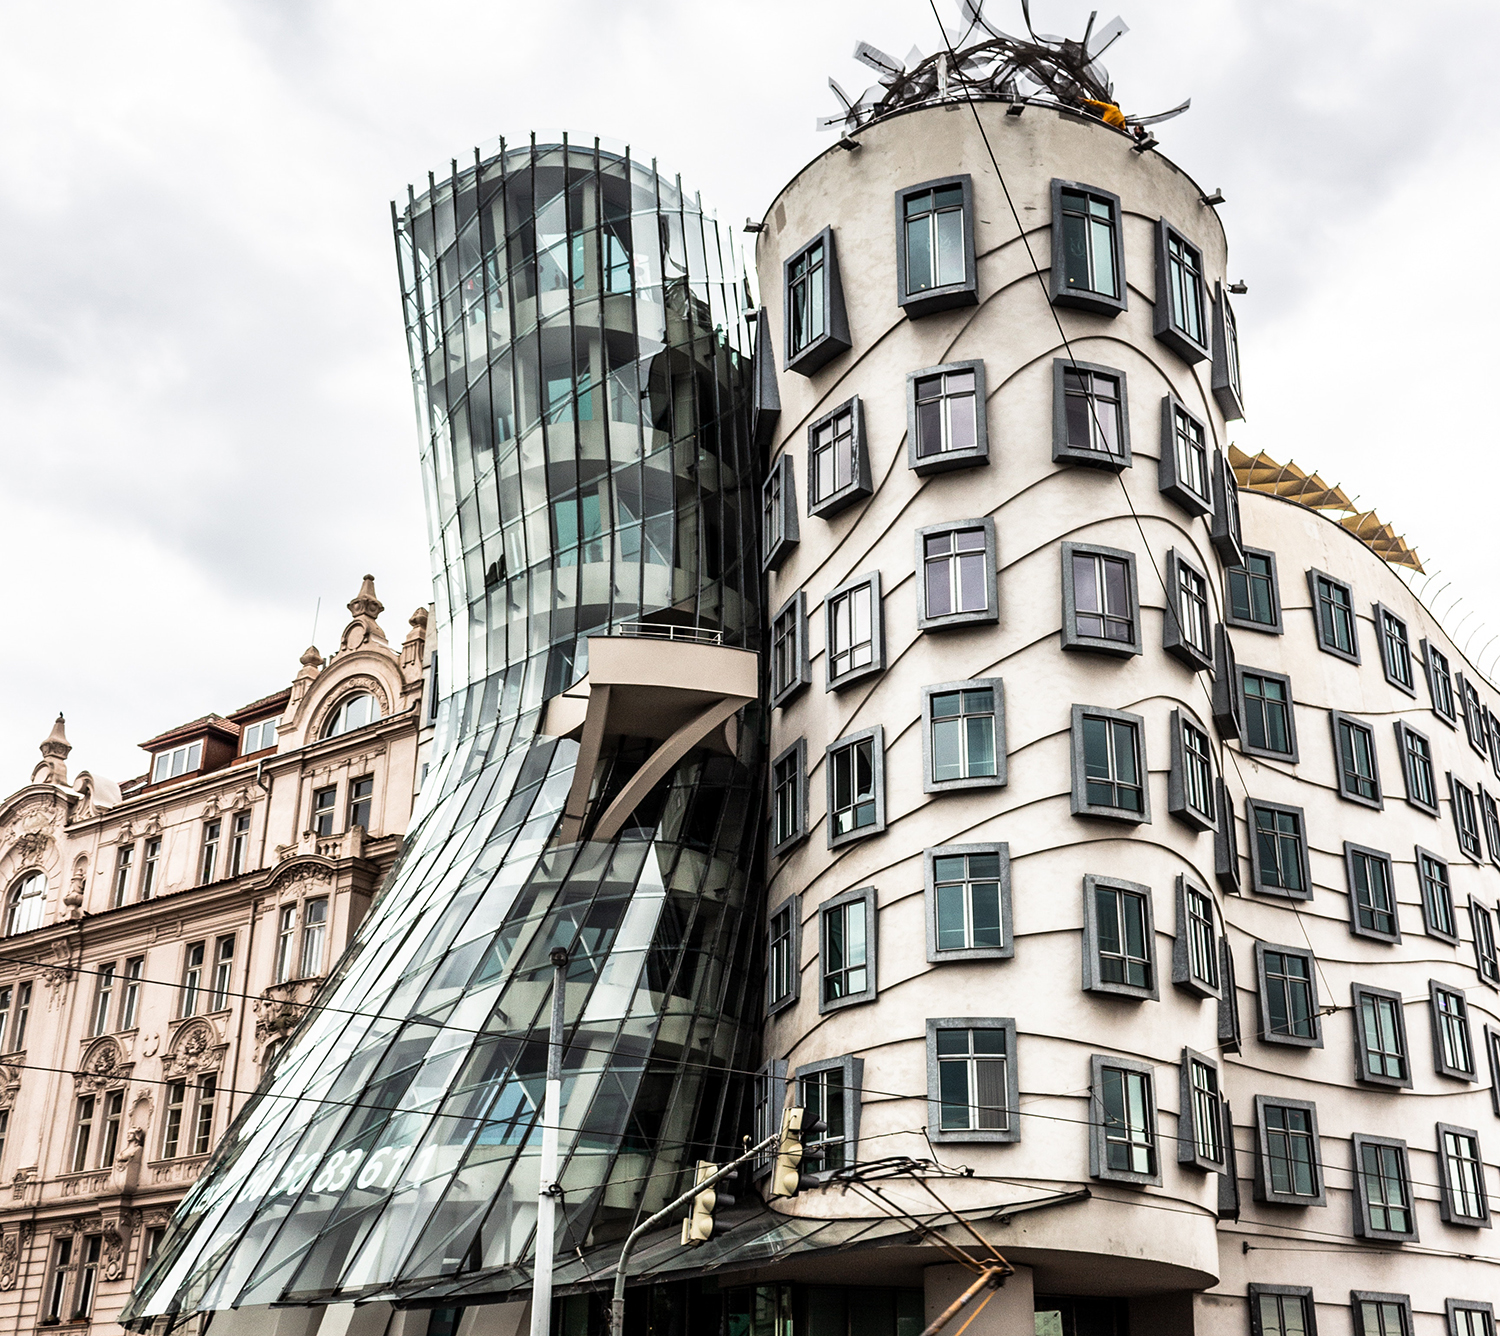 The Dancing House in Prague by architects Vlado Milunić and Frank Gehry